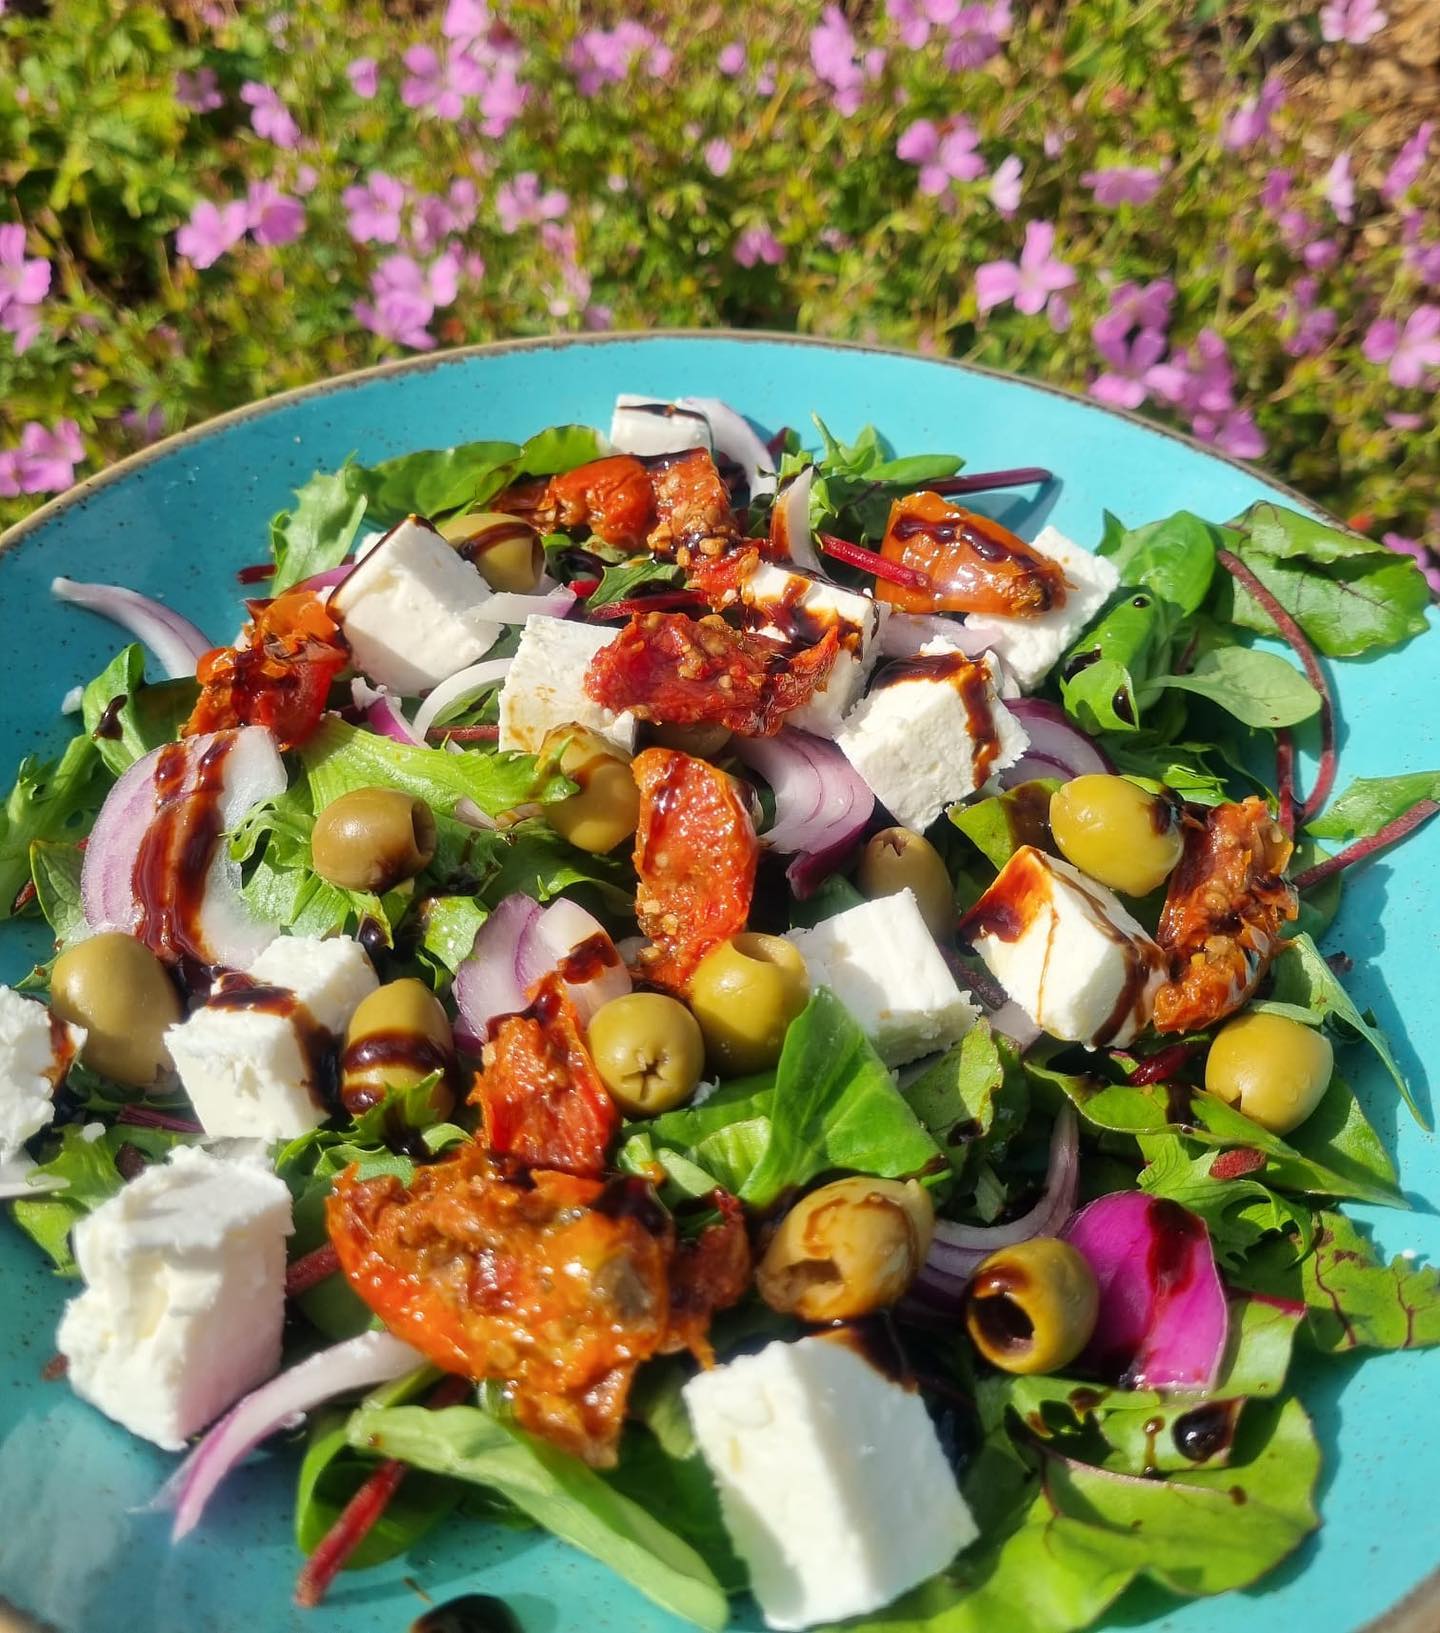 The weather today is going to be lovely so we are celebrating with this week's special.....

Mediterranean Salad

Enjoy a bowl of fresh mixed salad leaves, chunky feta, sun dried tomatoes and mixed olives finished with a generous drizzle of balsamic glaze.

#headlandsfarm #headlandsfarmcoffeeshop #salad #Mediterraneansalad #sunshine